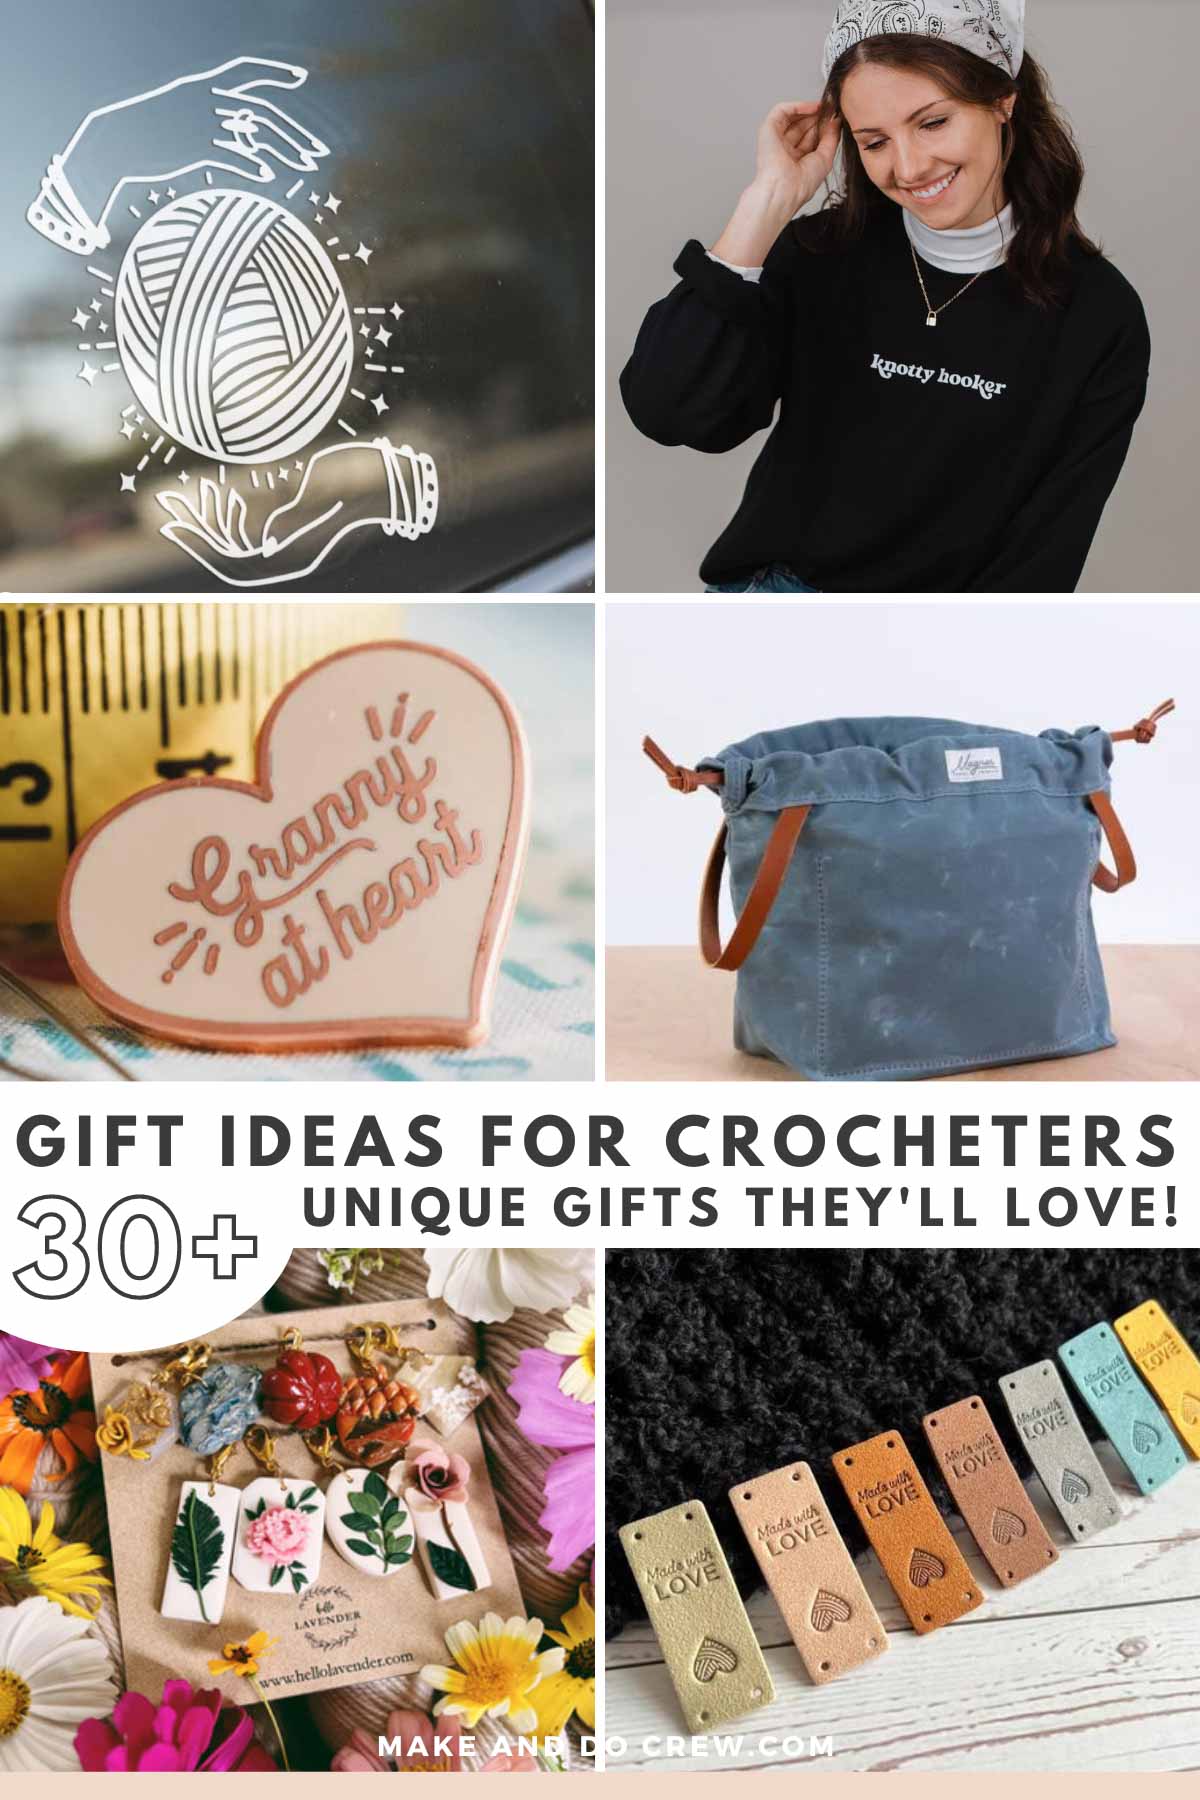 Grid of gift ideas for crocheters including an enamel pin, sweatshirt, car decal, project tags and stitch markers.